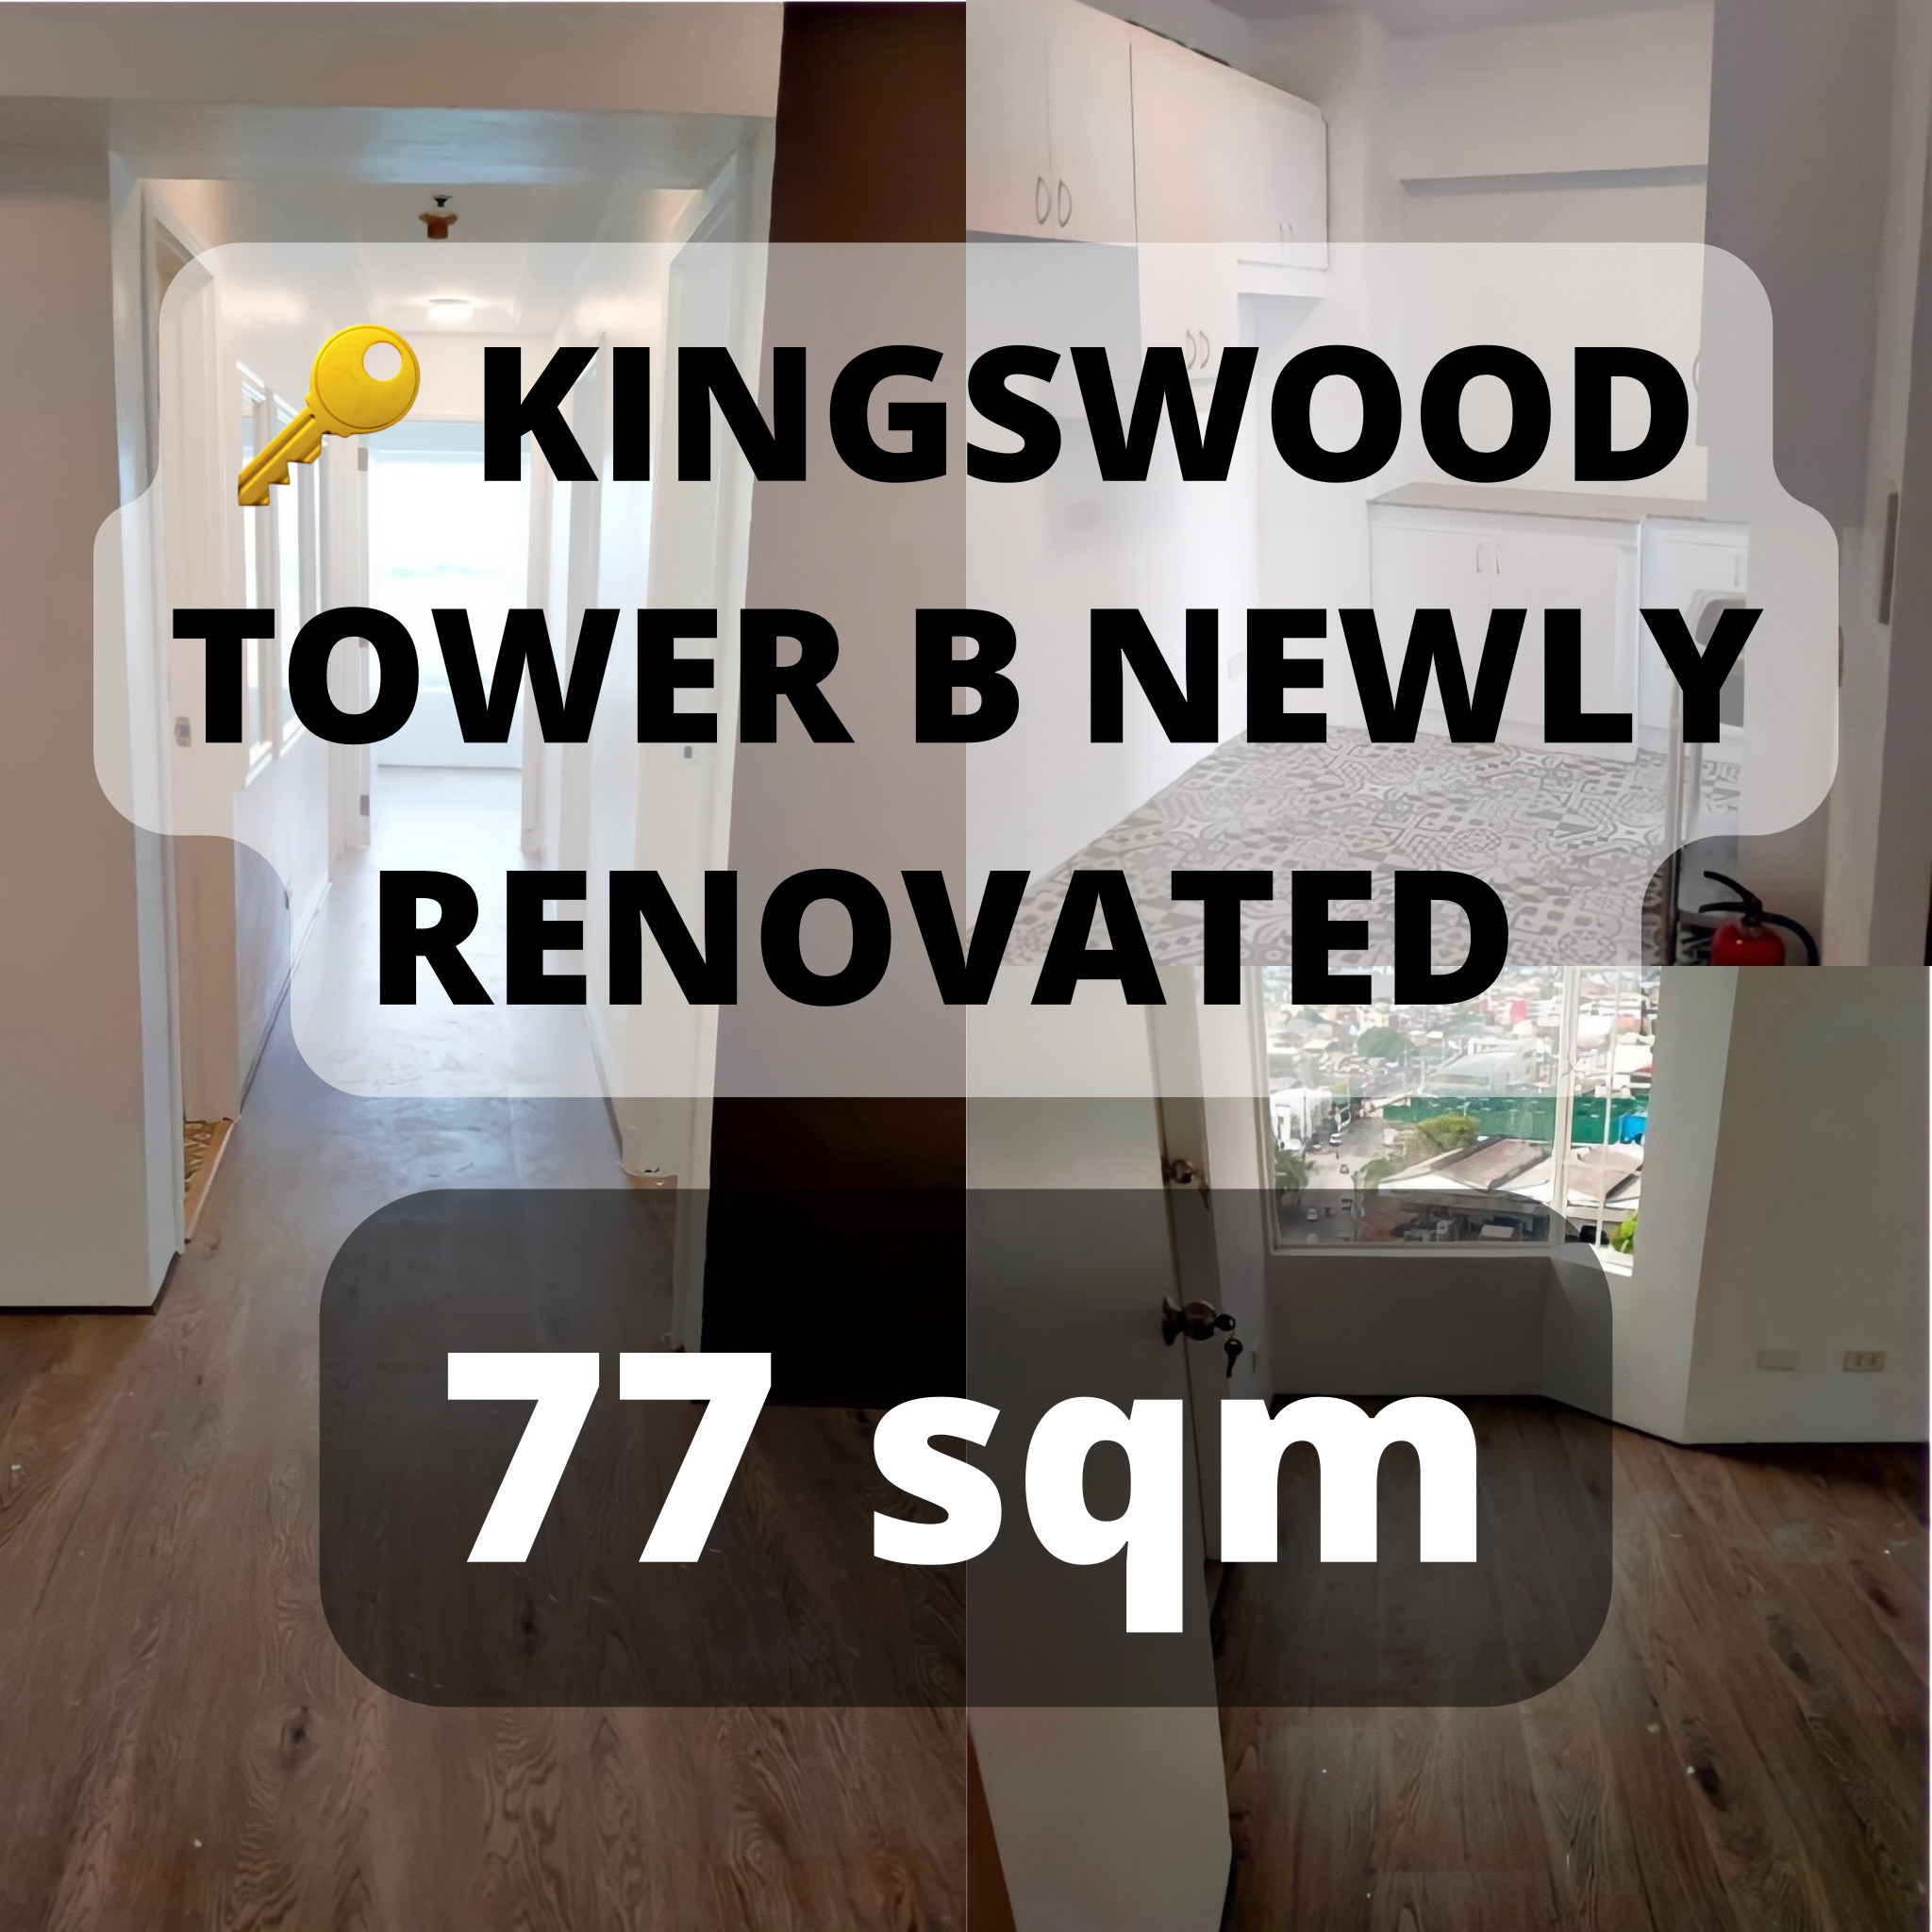 KINGSWOOD TOWER B NEWLY RENOVATED ‼️